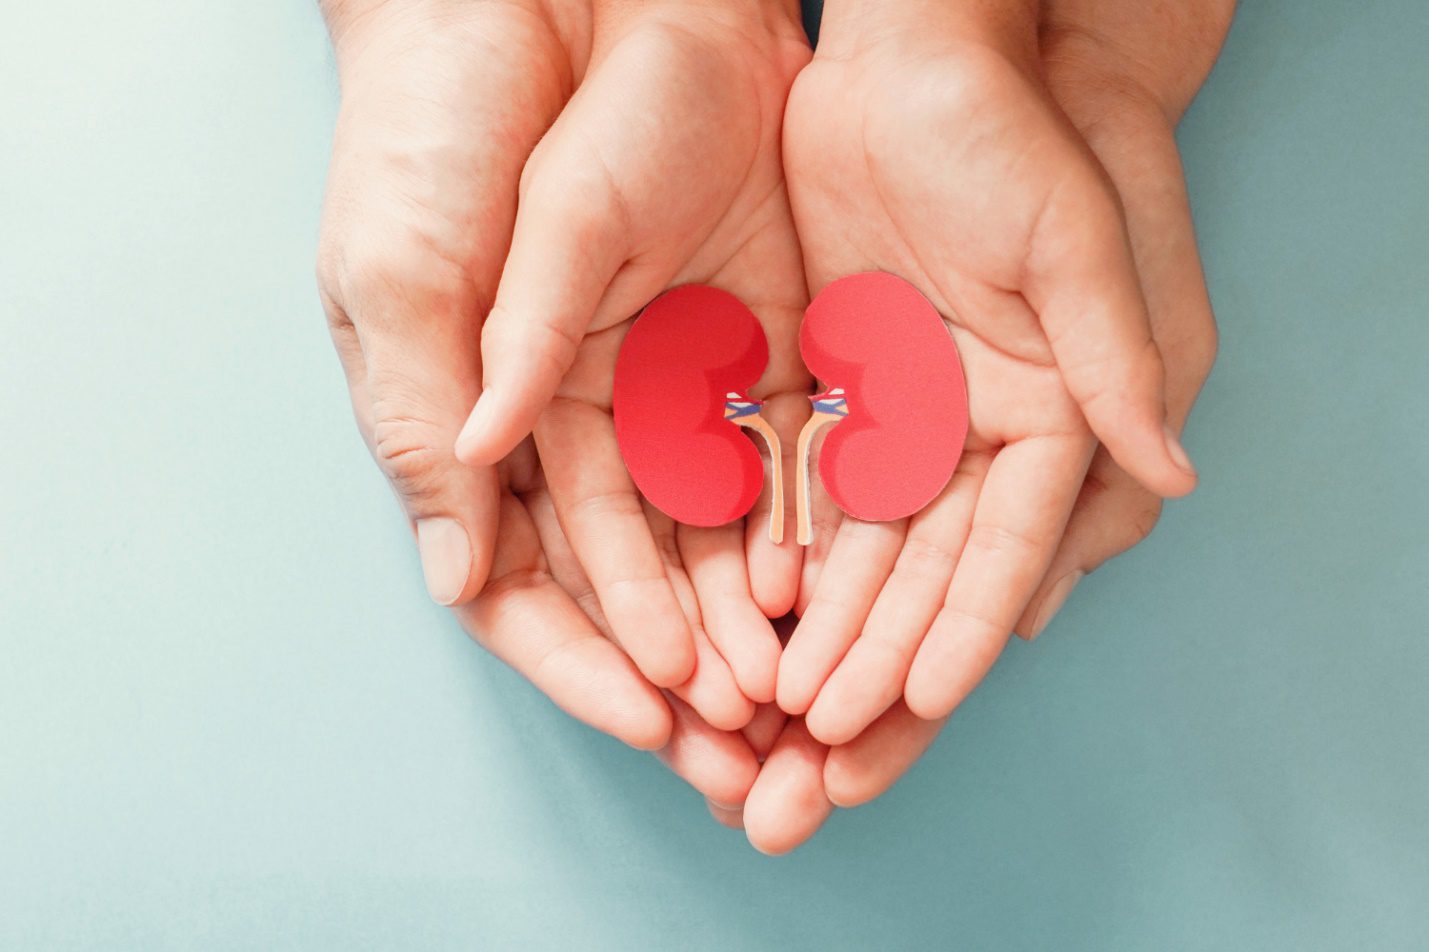 C:\Users\Dell\Downloads\adult-child-holding-kidney-shaped-paper-world-kidney-day-national-organ-donor-day-charity-donation-concept.jpg